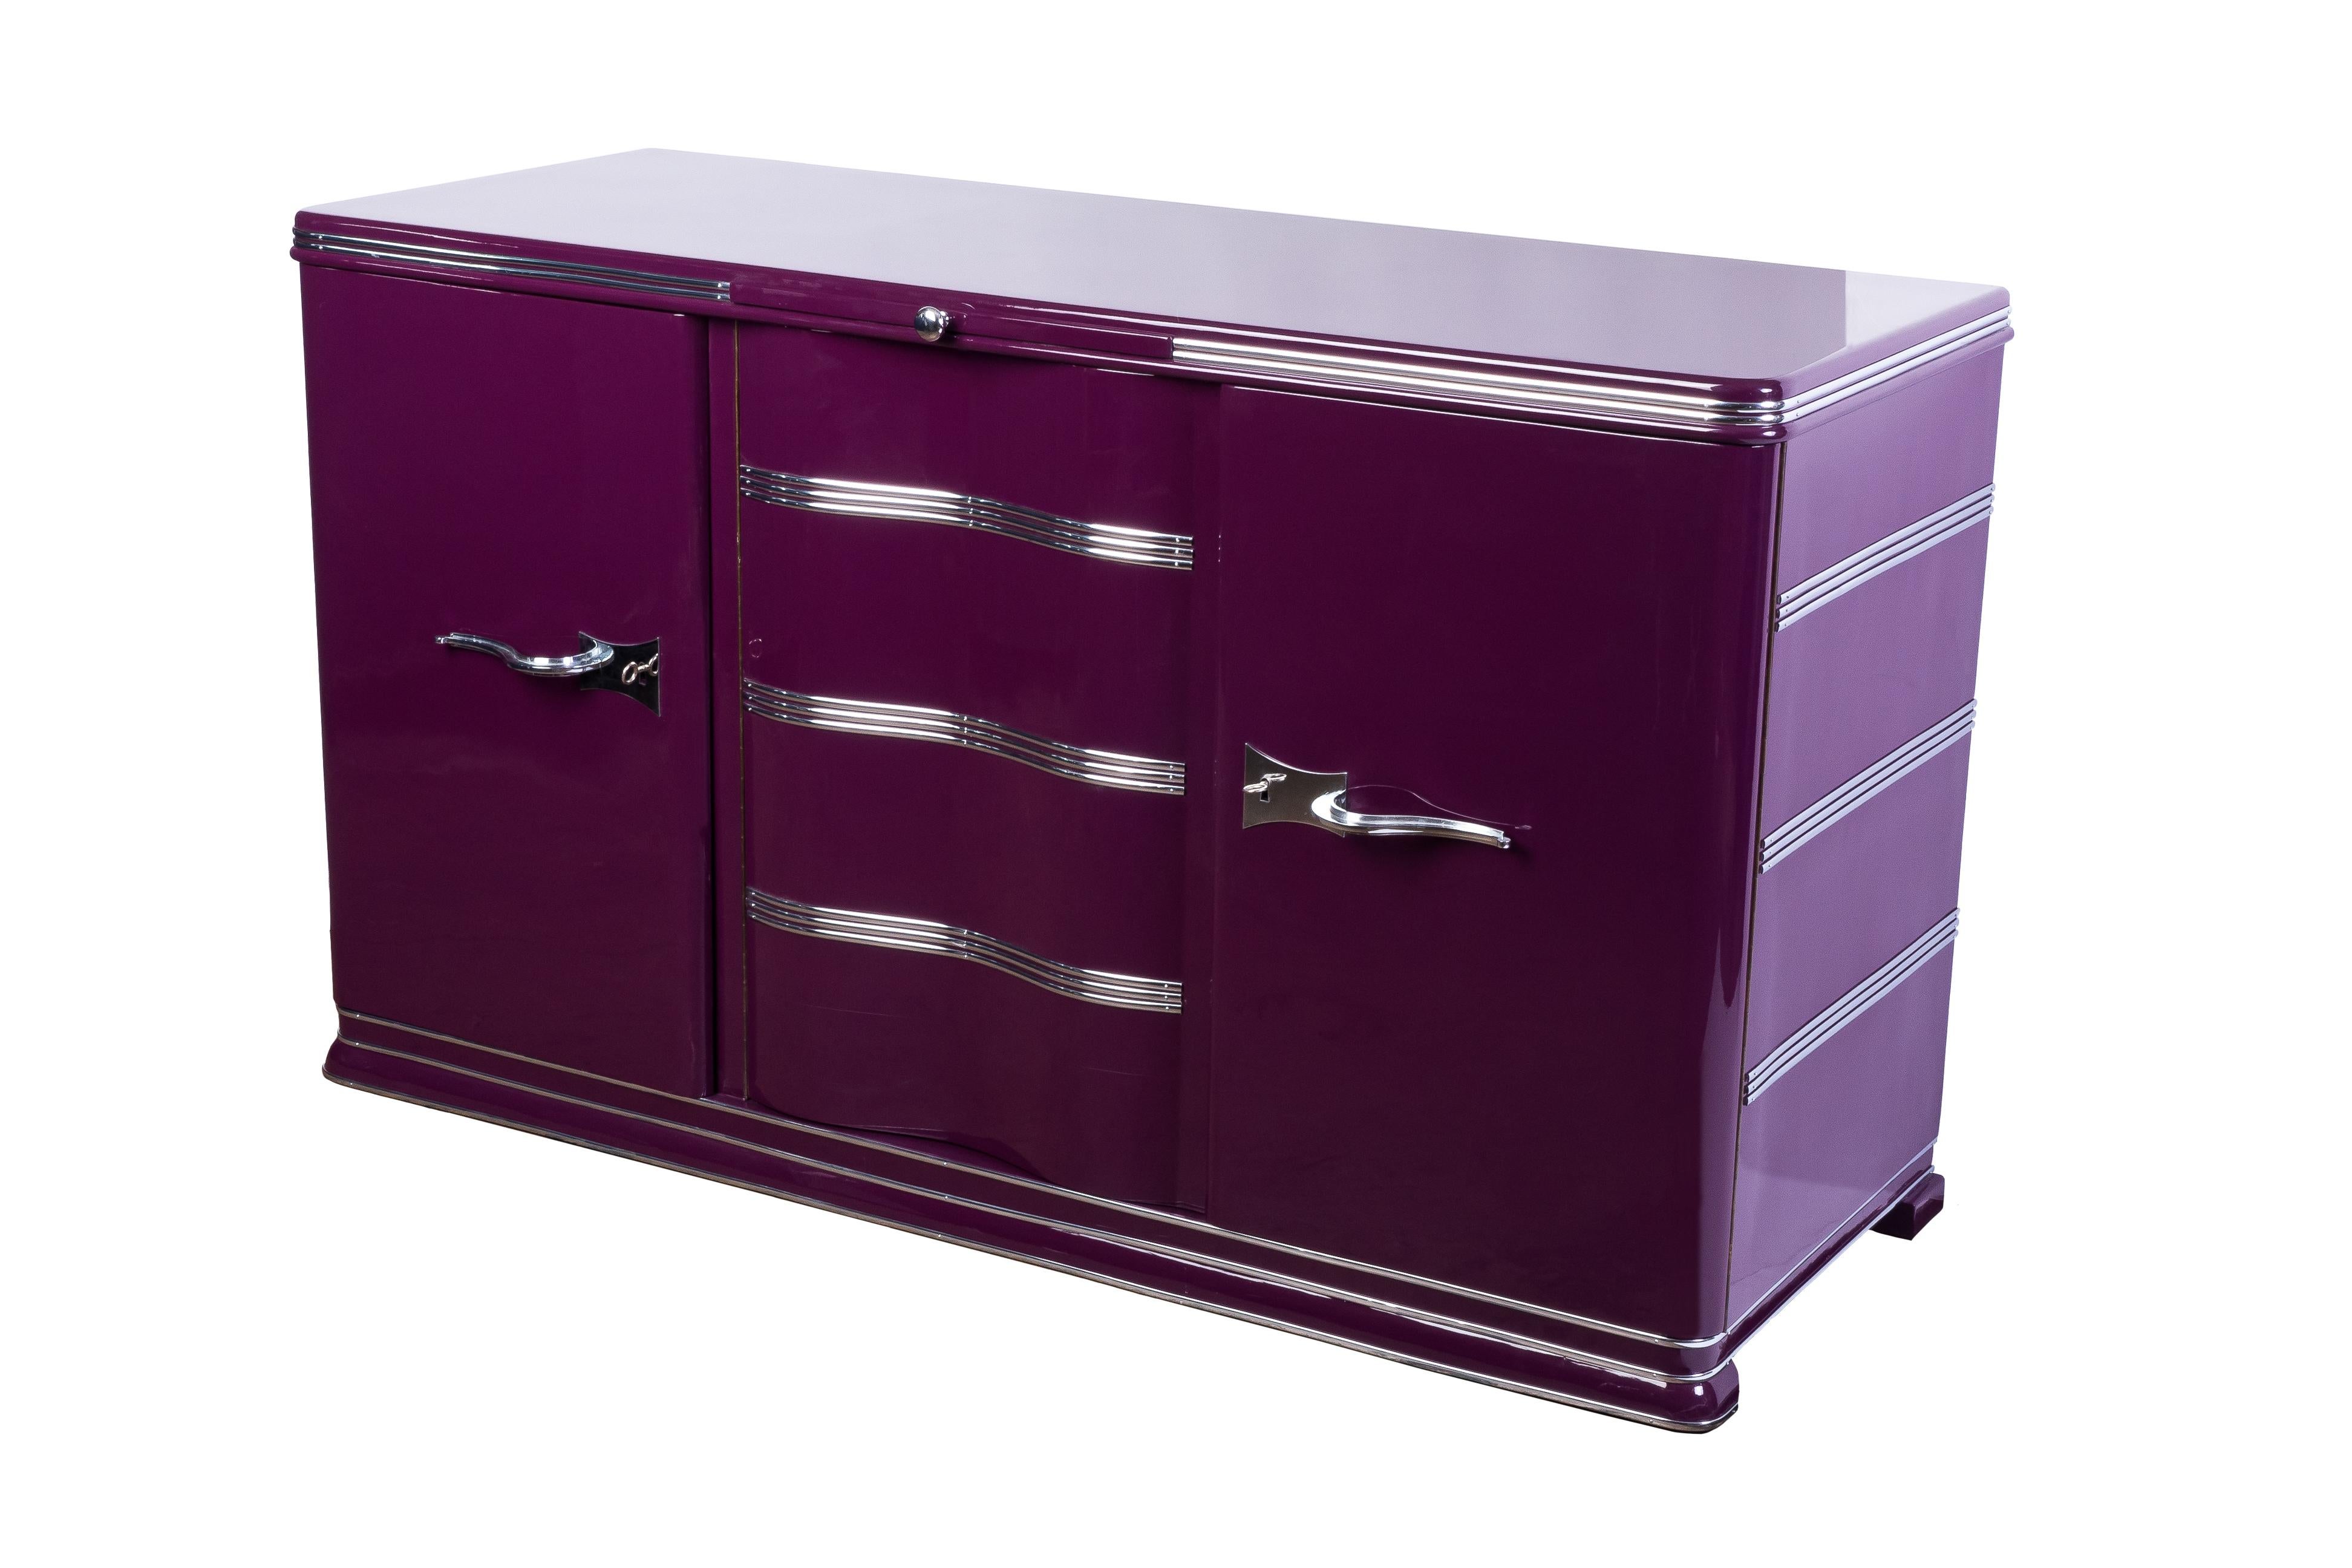 Luxe Art Deco sideboard features (3) exterior swing doors with (2) oak drawers and a shelf in the left compartment and one shelf for storage on the large compartment. It has been finished in a beautiful high gloss Lilac lacquer with chrome detailing